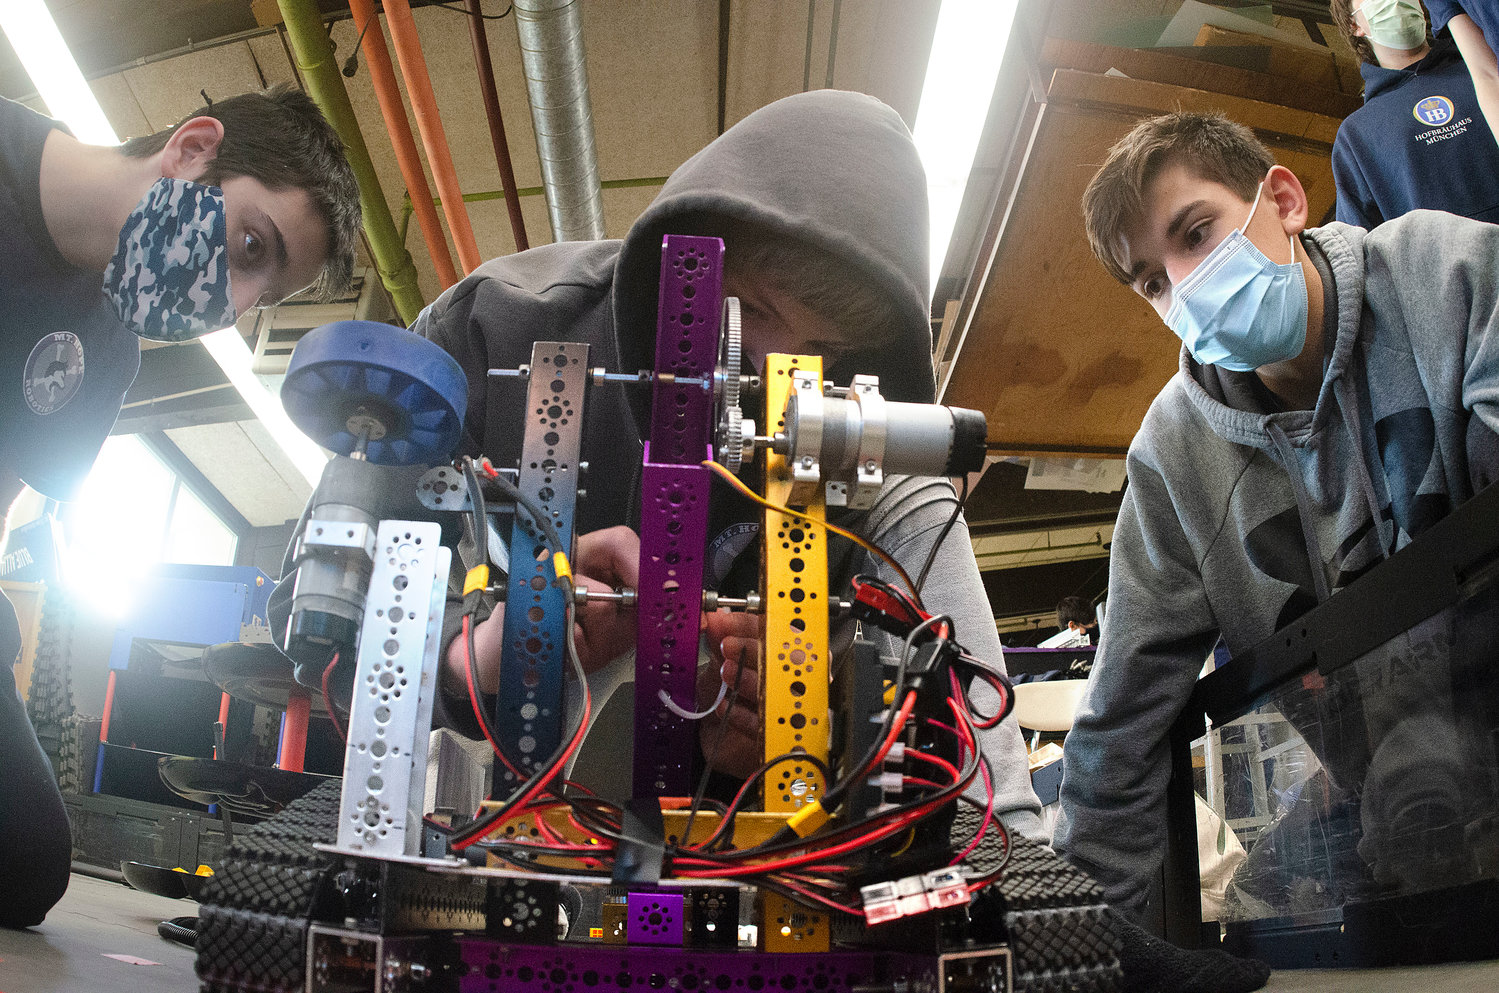 Michael Thibault and Chris Sousa repair their robot after a breakdown in the arena.